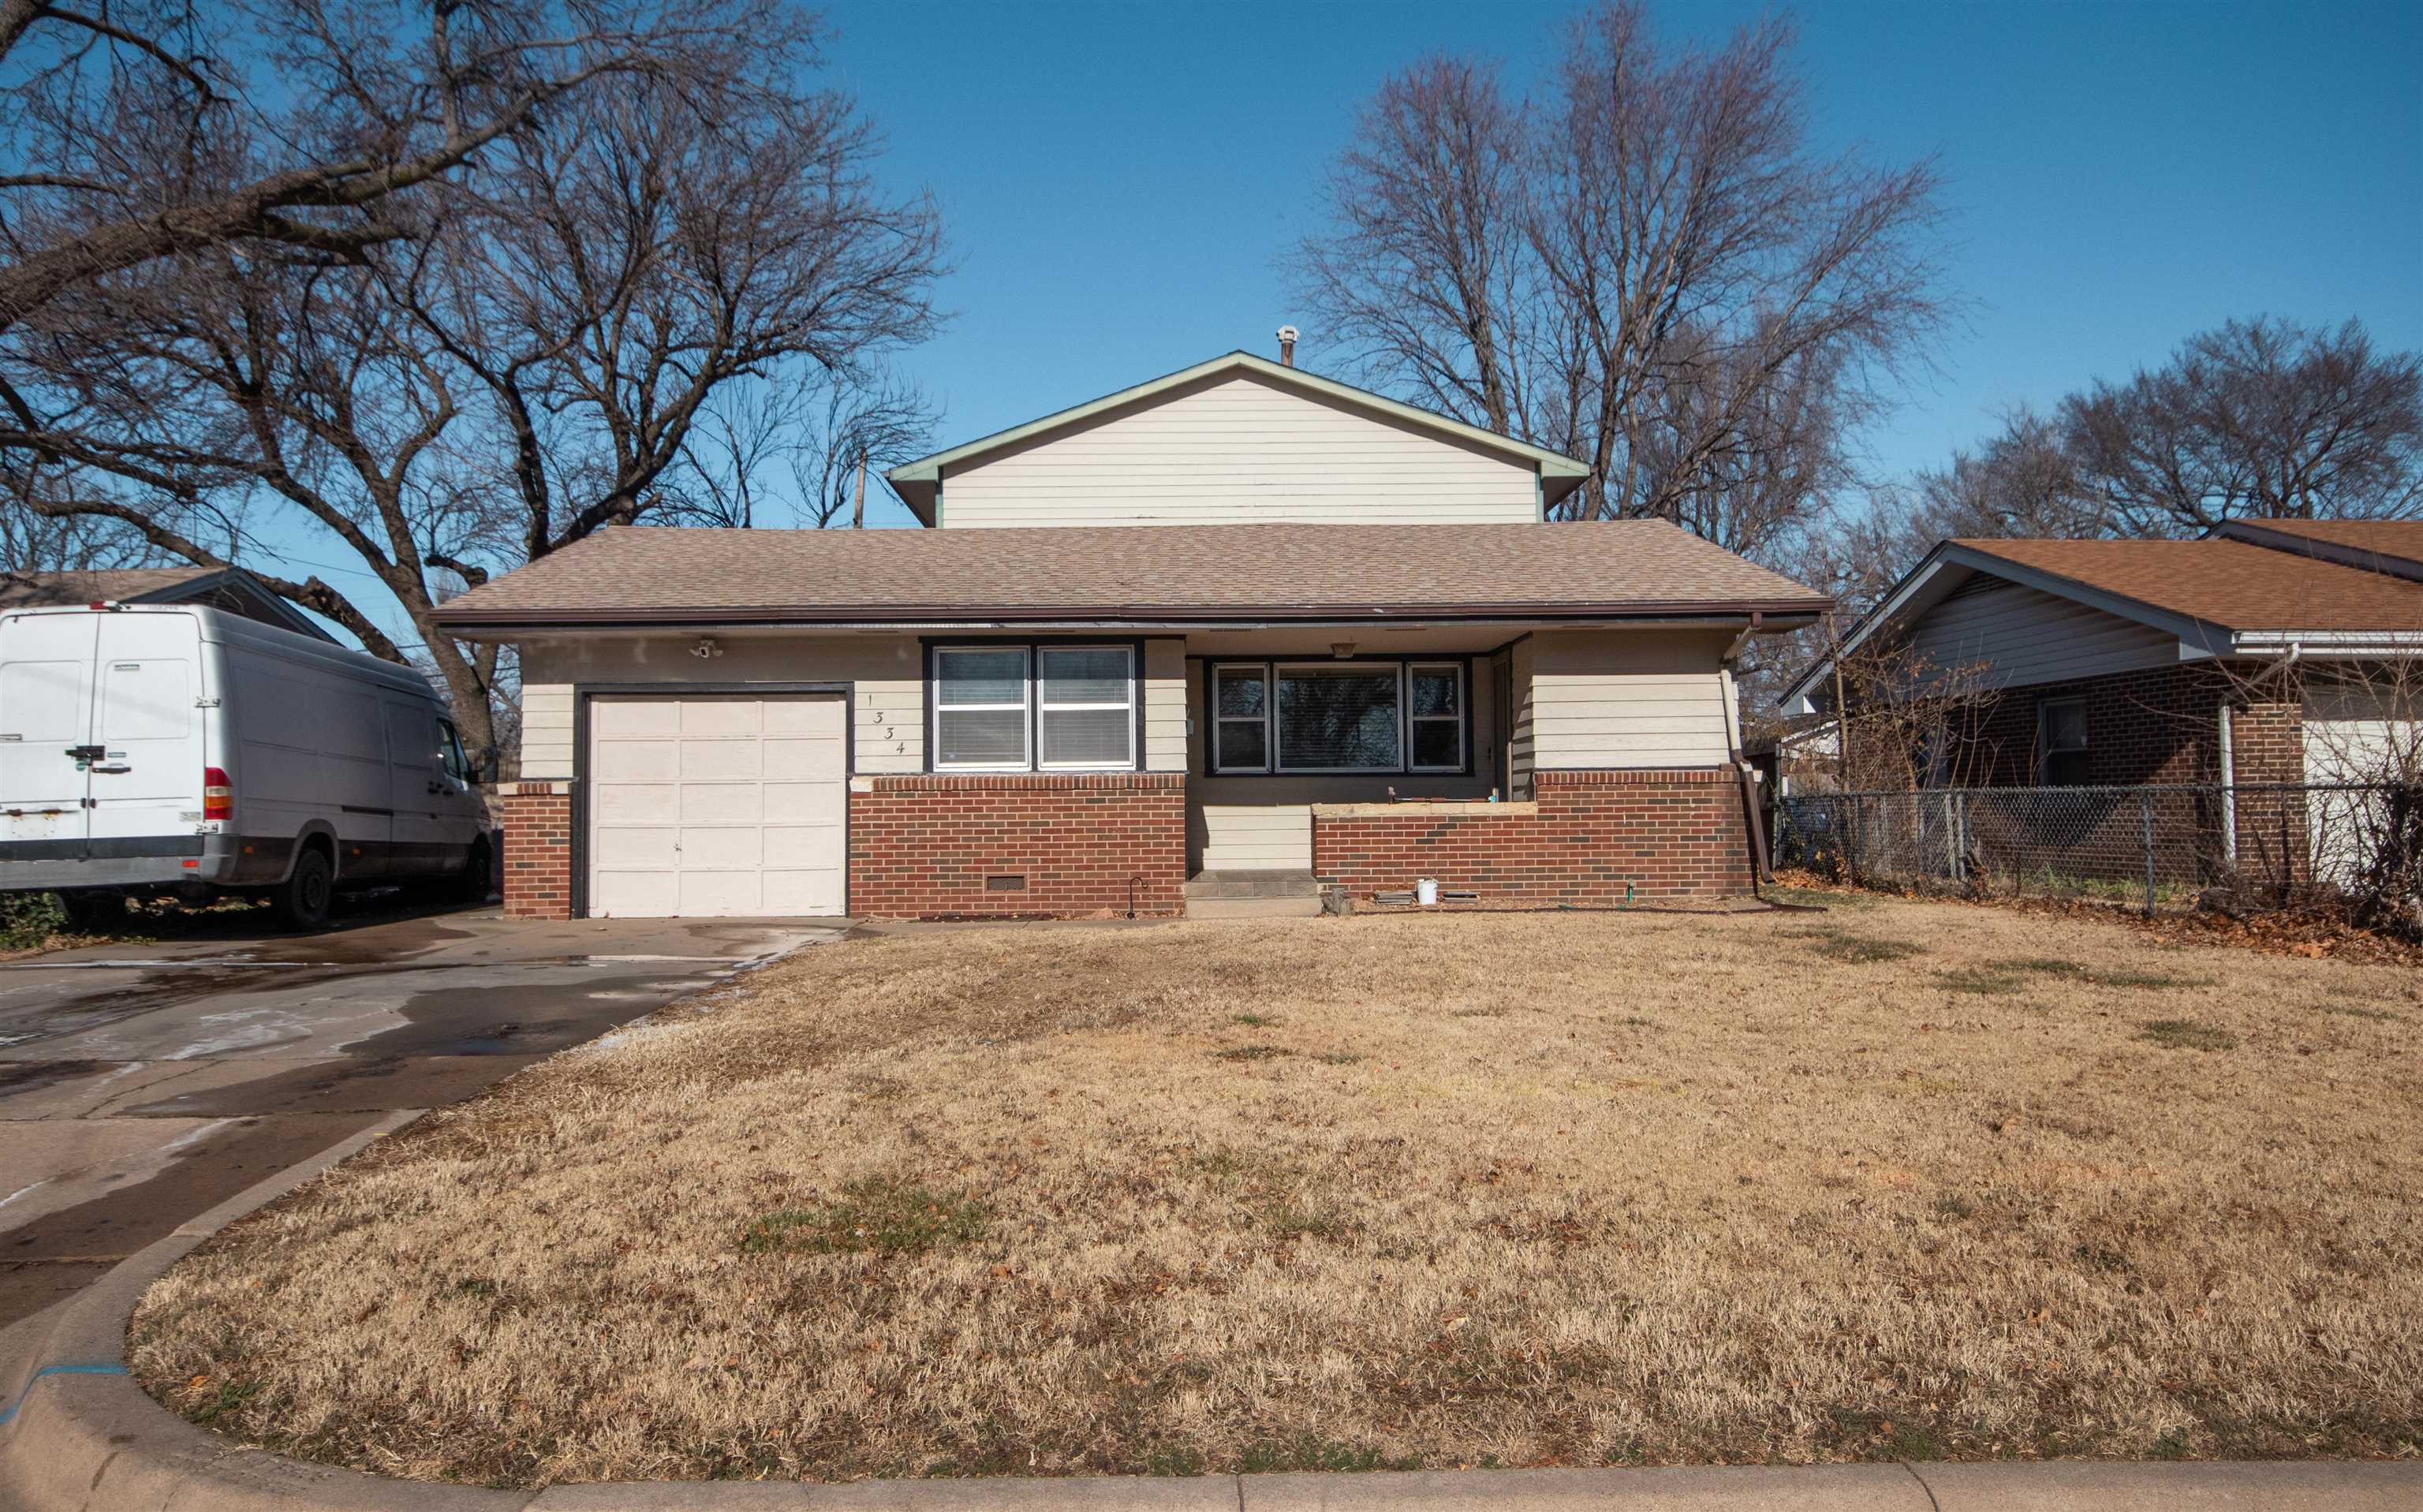 Updated home in a quiet south Wichita neighborhood. This 4 bedroom, 2 bathroom home welcomes you in 